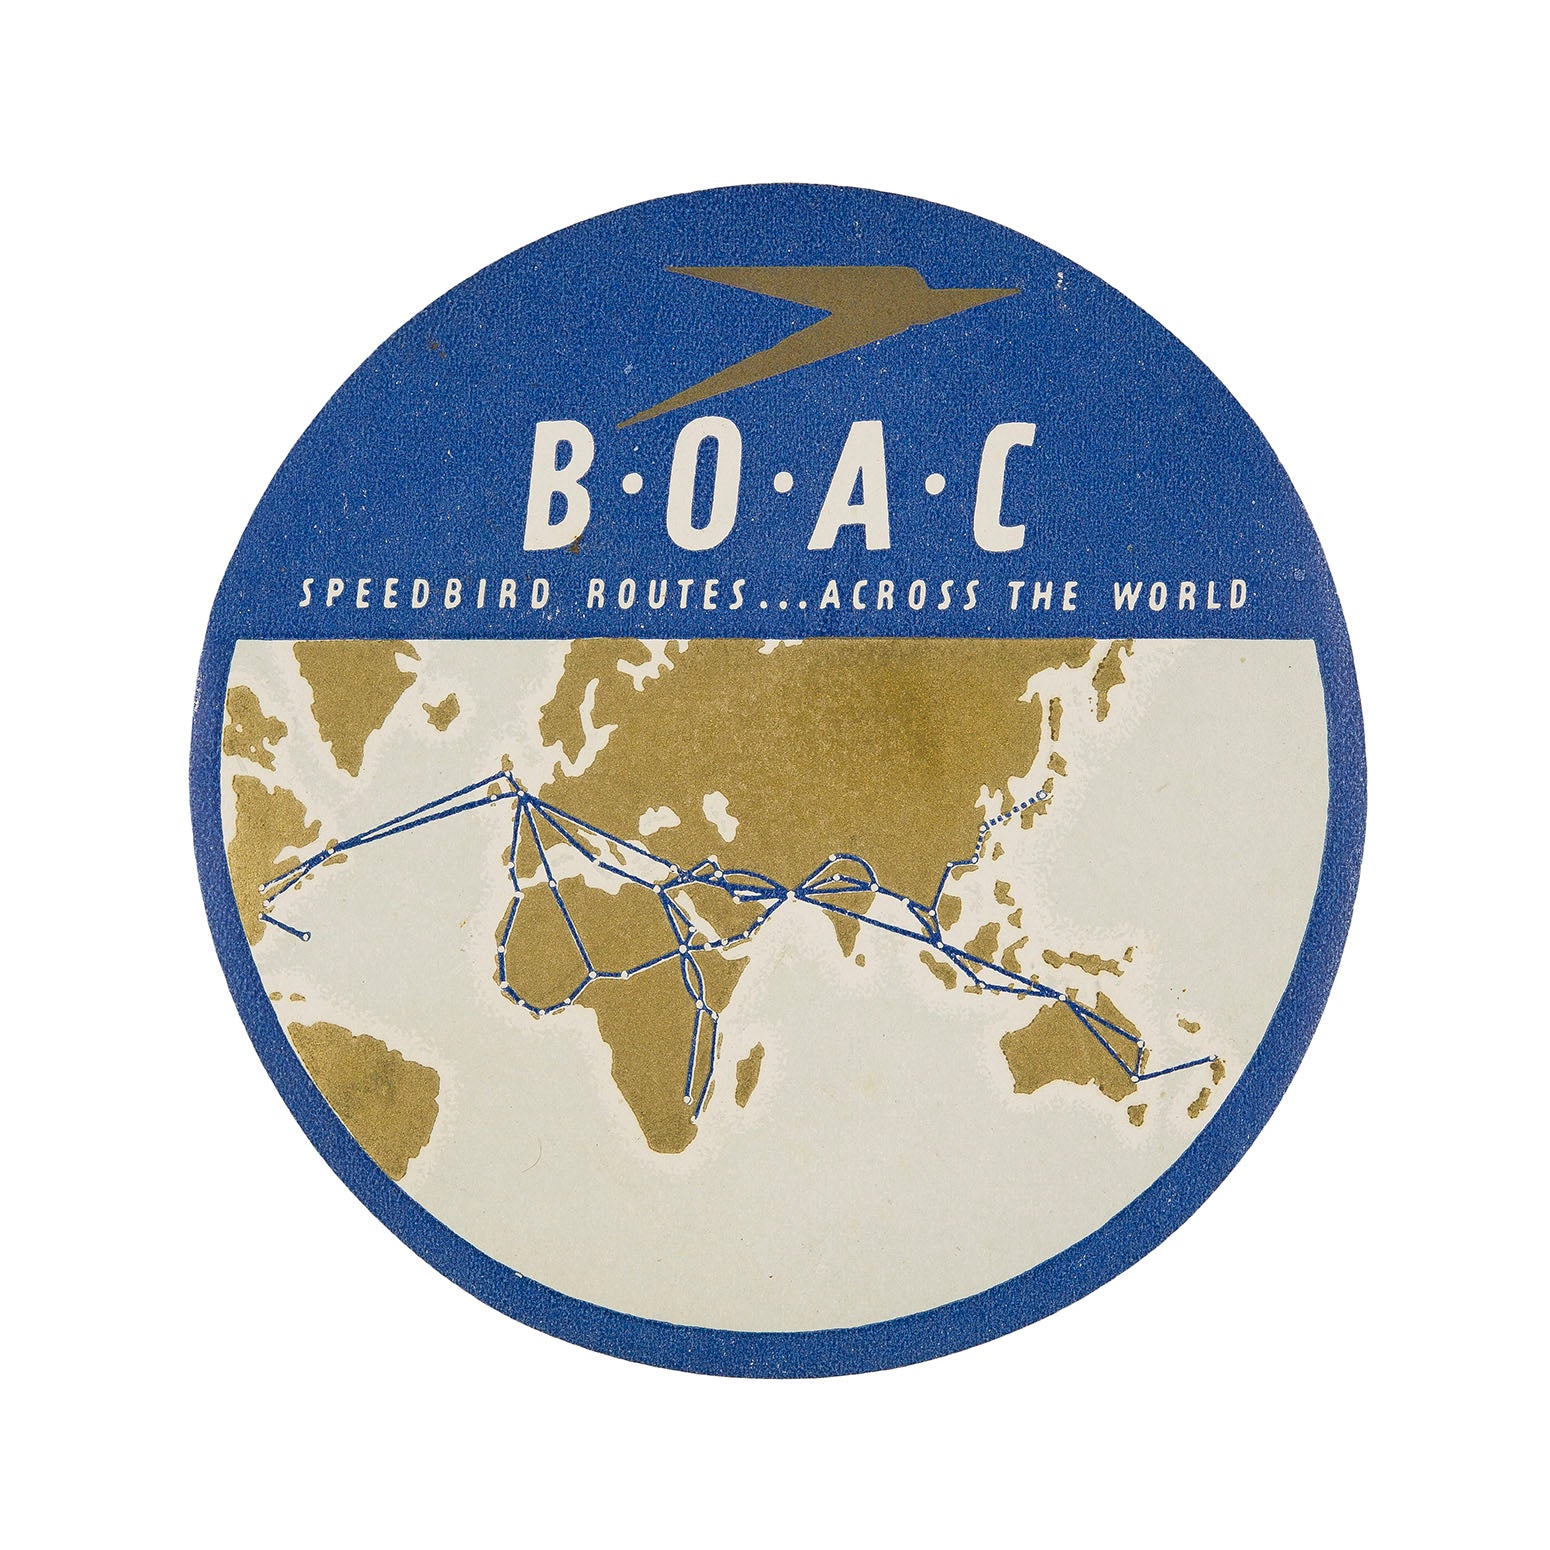 BOAC Speedbird Routes… Across the World (Luggage Label - larger size)